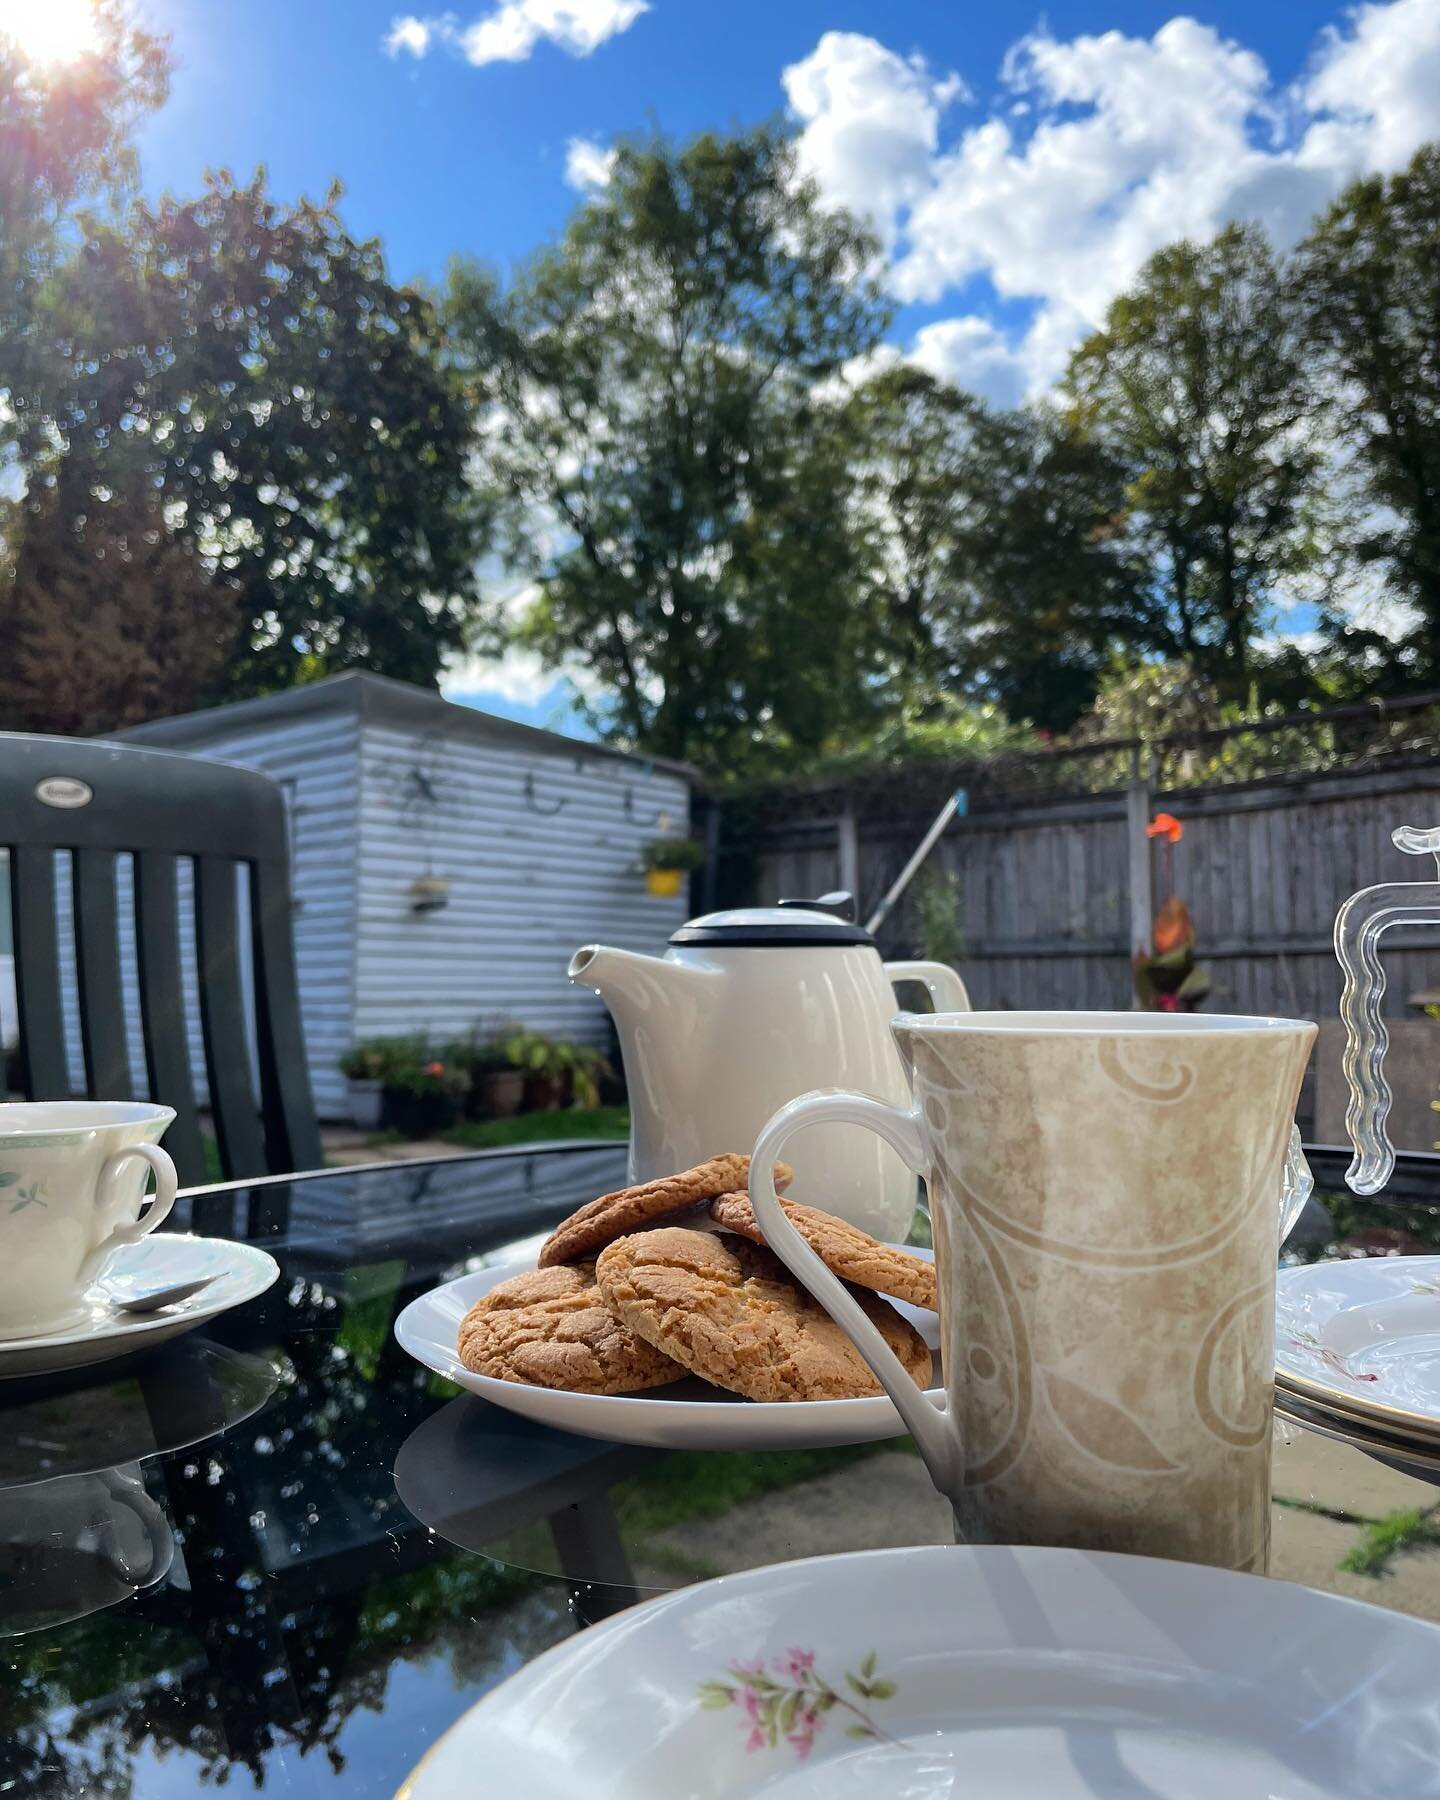 Taking a moment to sit and enjoy my youngest homemade cookies. Outside in the gorgeous sunshine 🌞 feeling blessed. 
My social media has been 🤫 quiet, I am hoping to rectify that - I am still here and have some new art works to share with you.

#fri